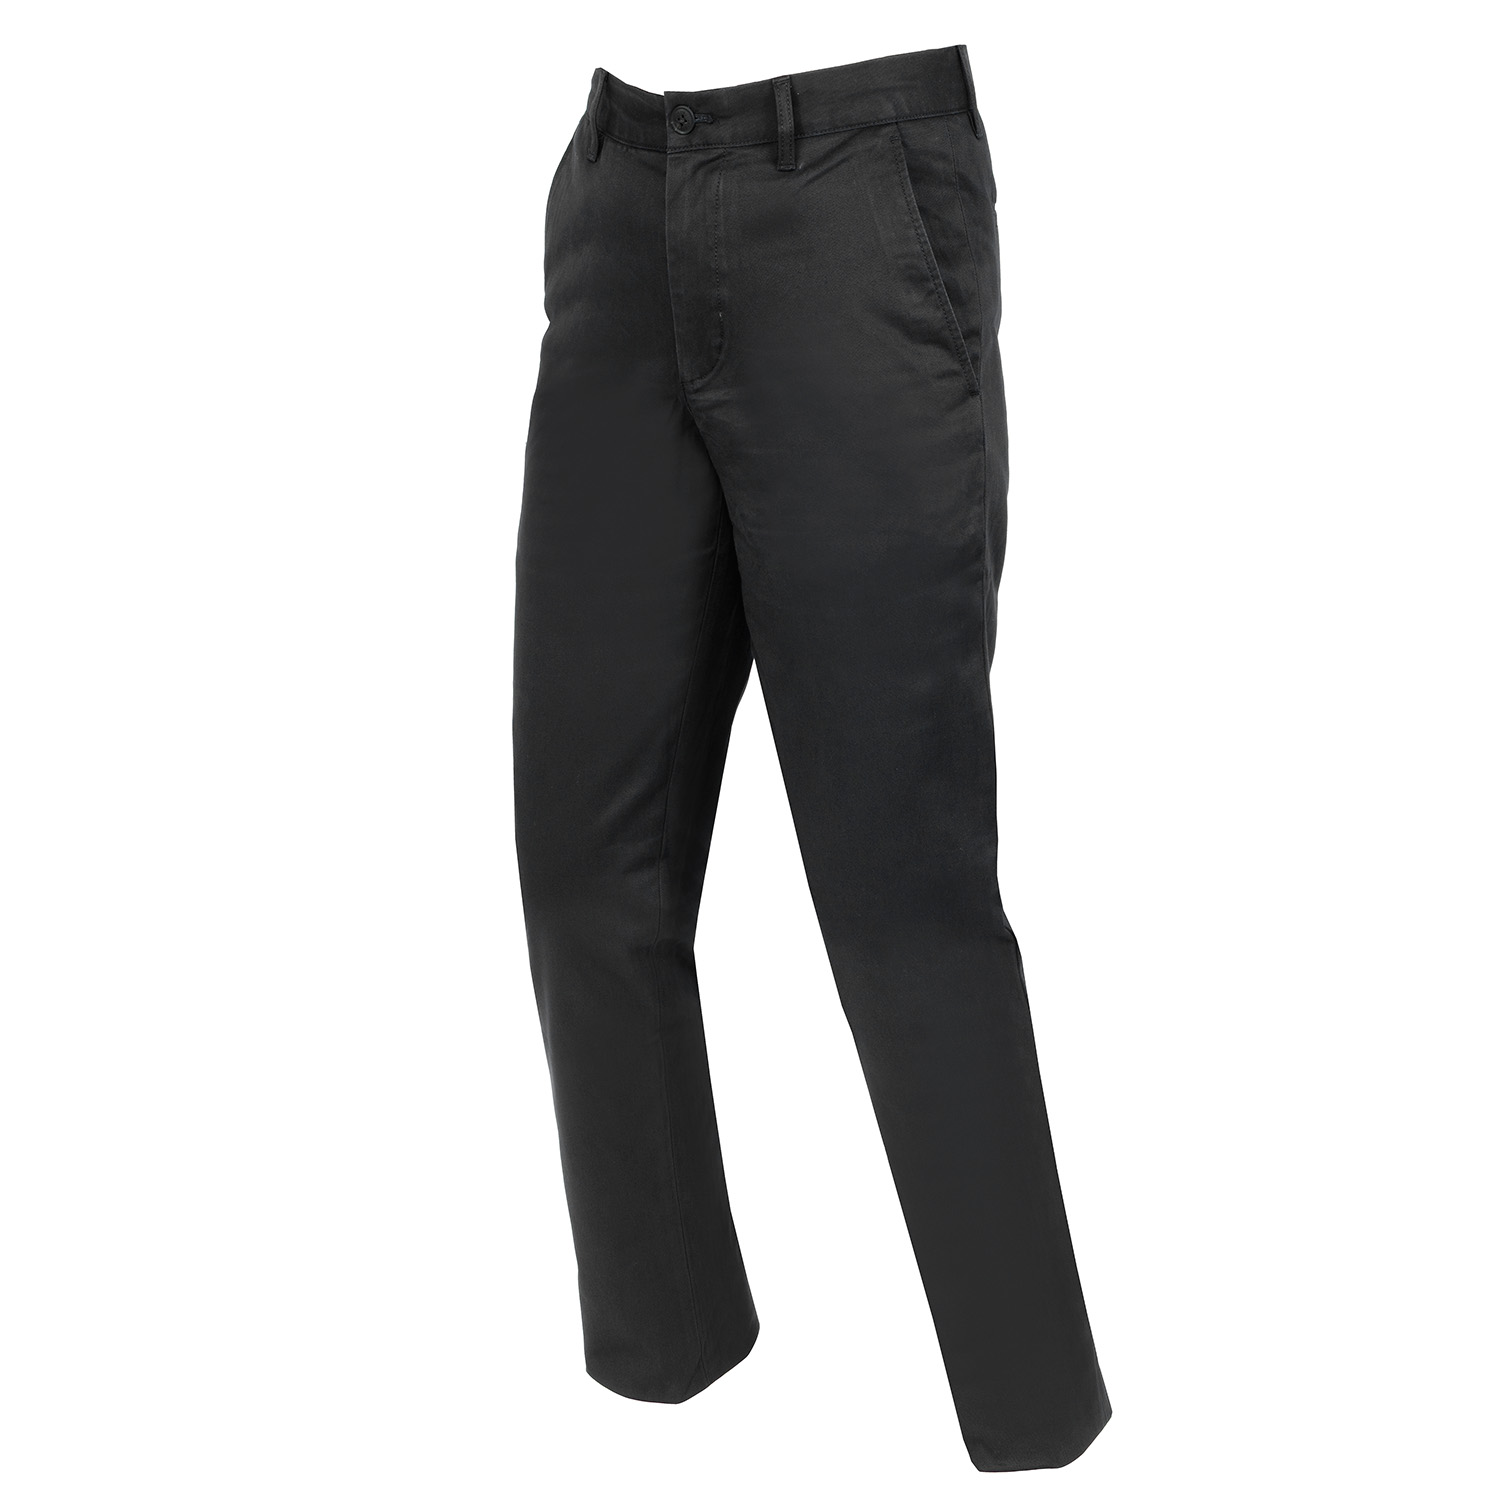 Lacoste Slim Fit Stretch Chino Trousers Black | Scottsdale Golf